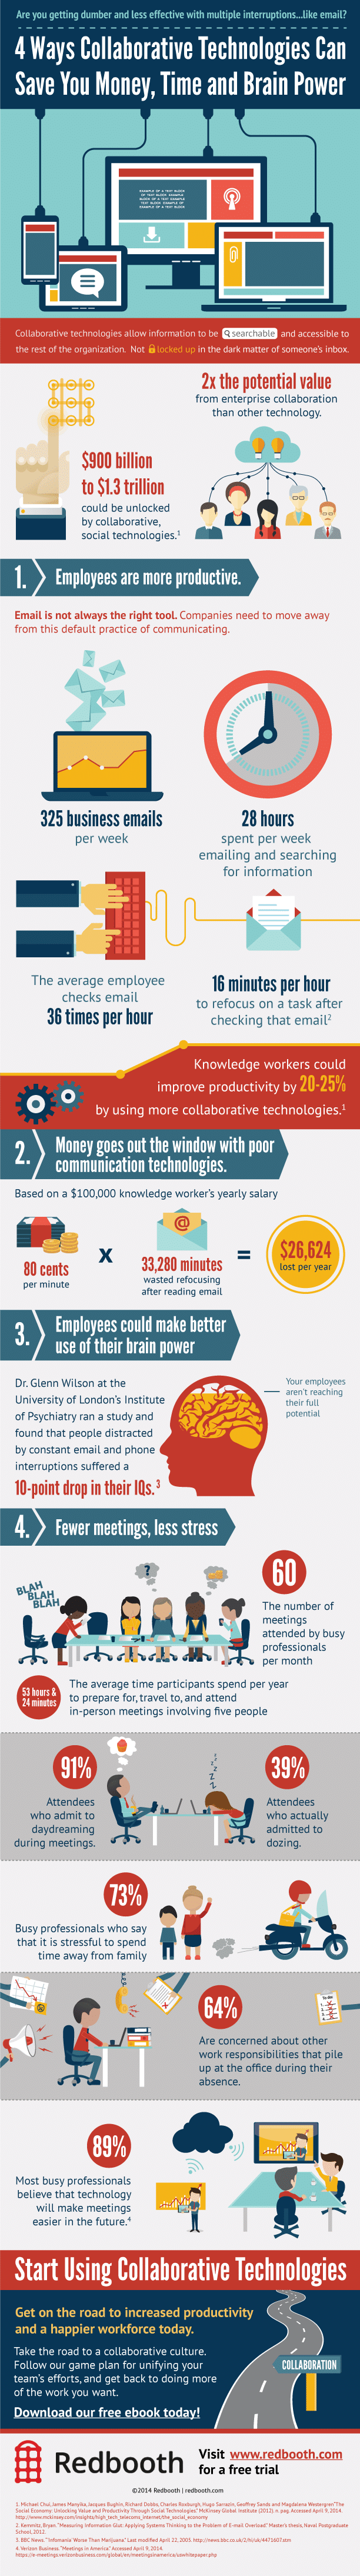 CollaborativeTechnology-Infographic-Redbooth